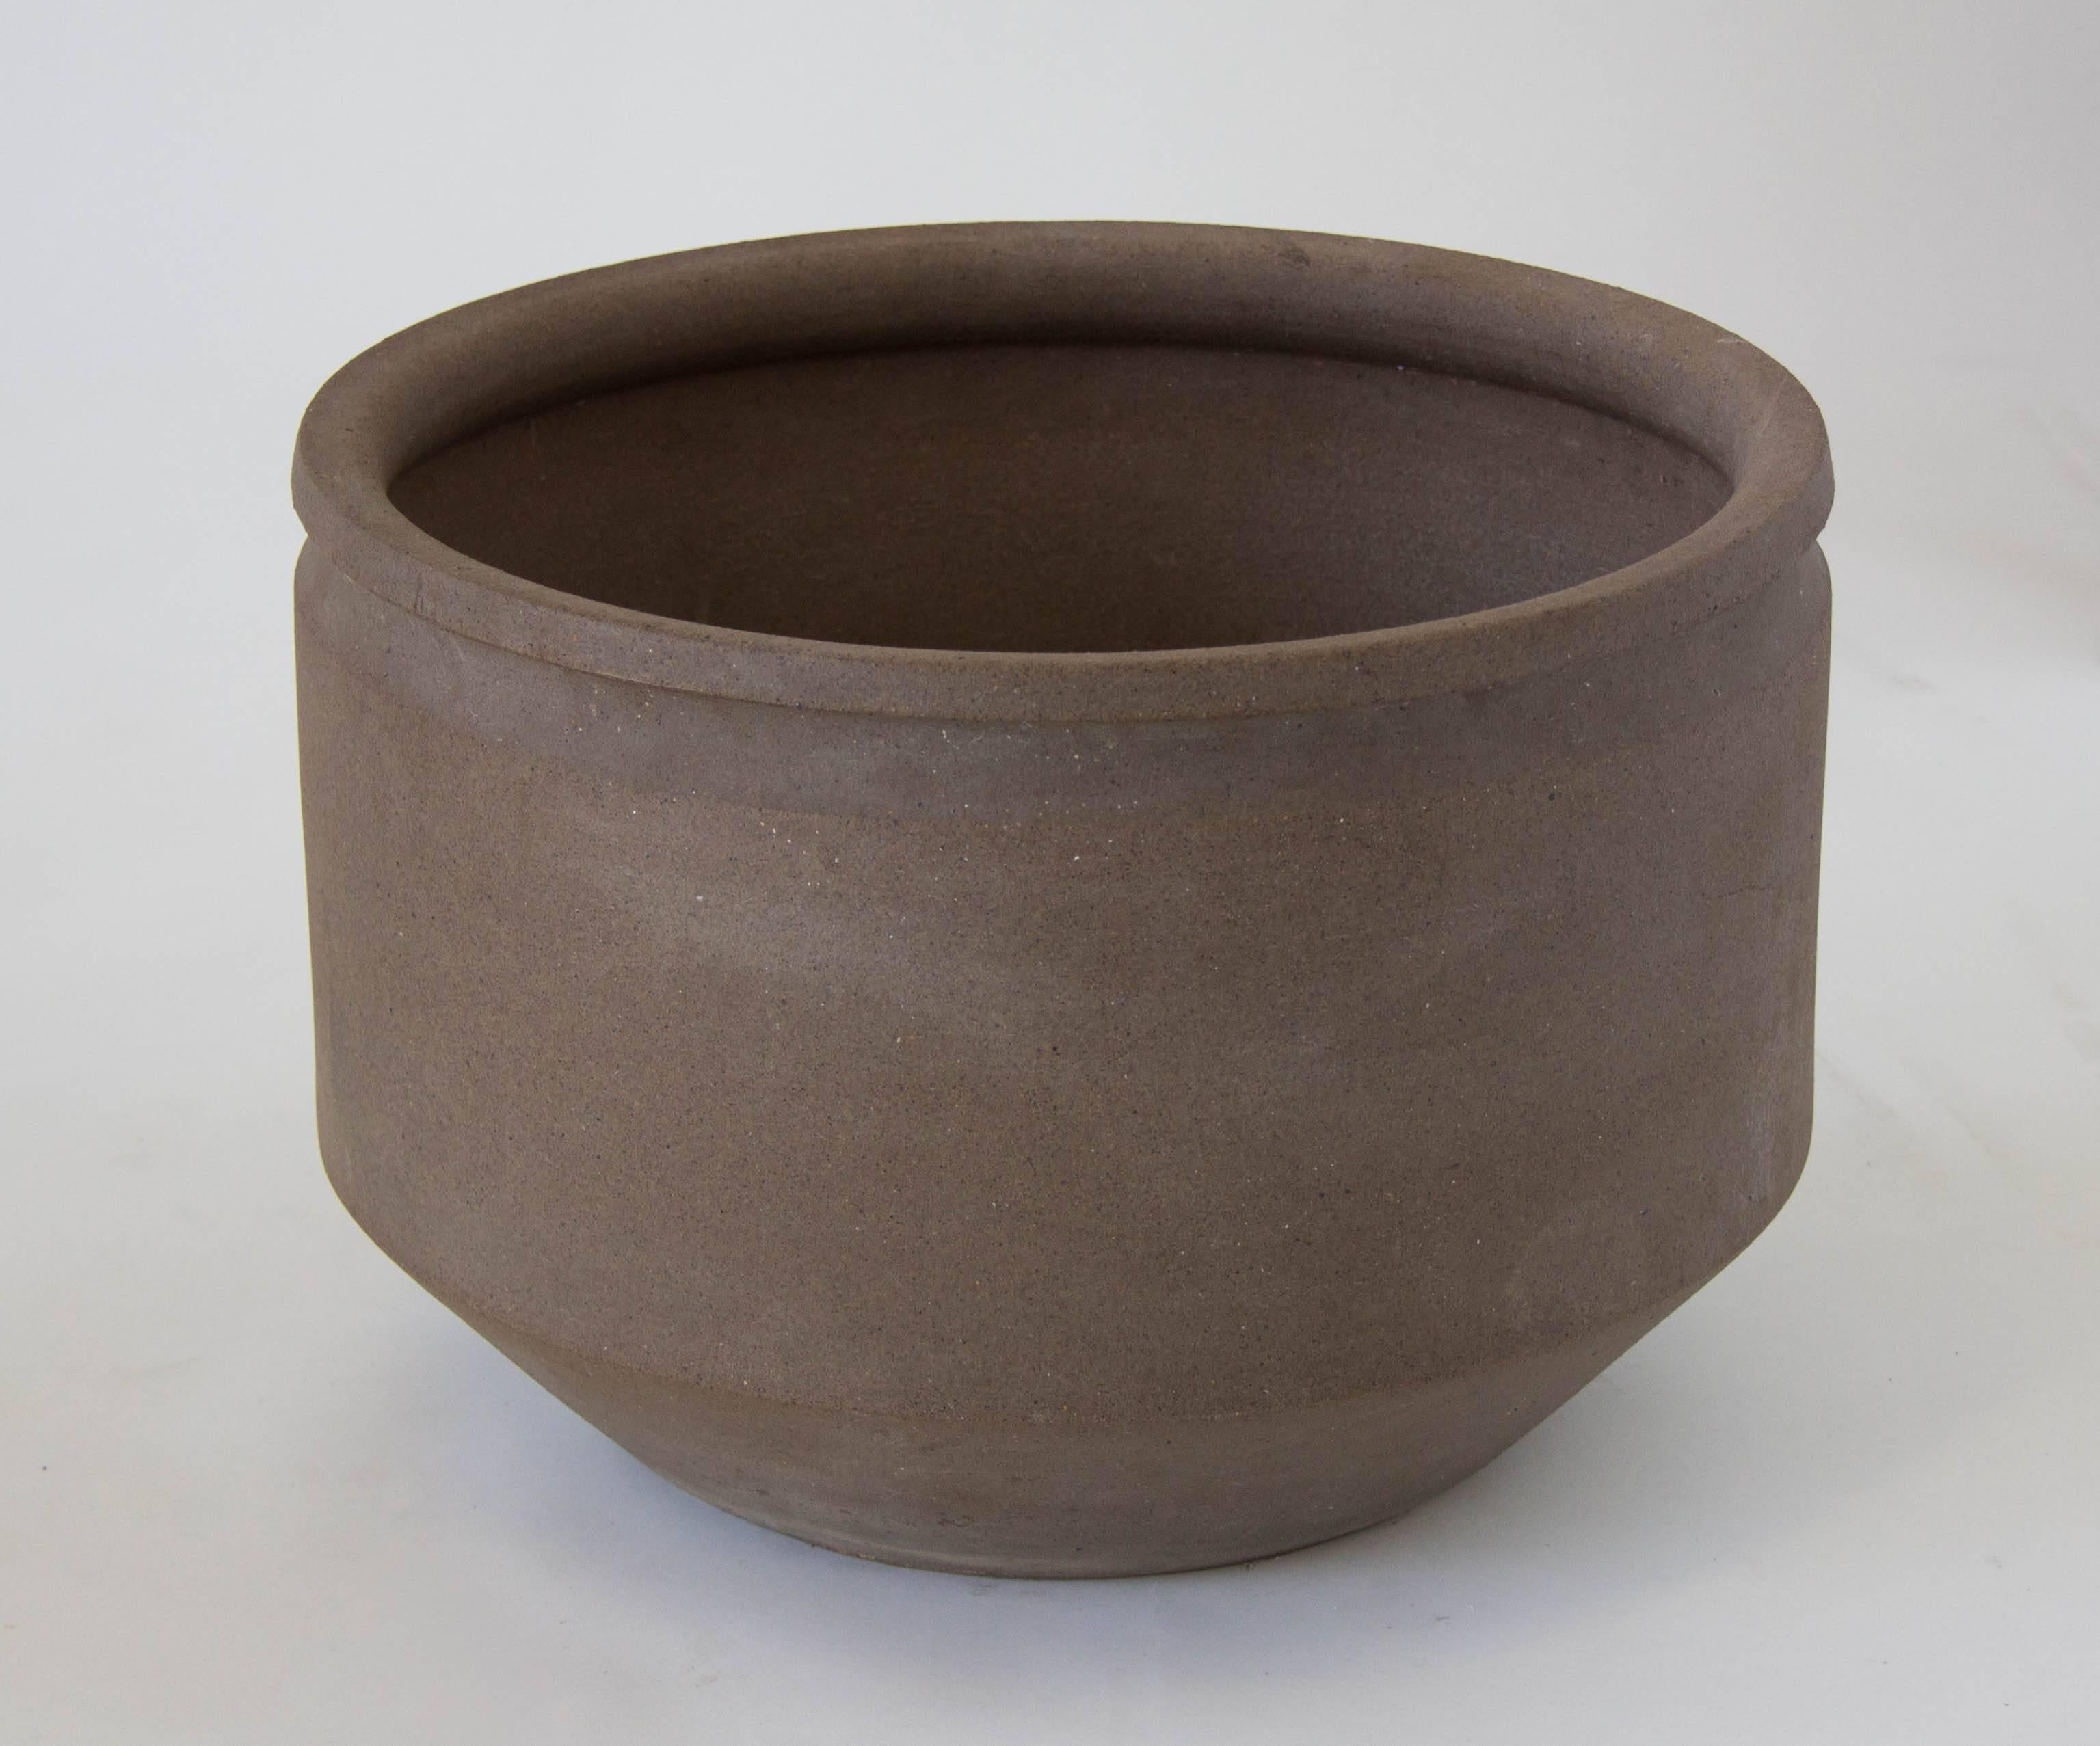 A Minimalist stoneware planter by David Cressey with flat sides angling towards the foot. The unglazed planter has a wide lip. 

Condition: Excellent vintage condition with no chips or cracks. Drainage holes were previously drilled into the bottom